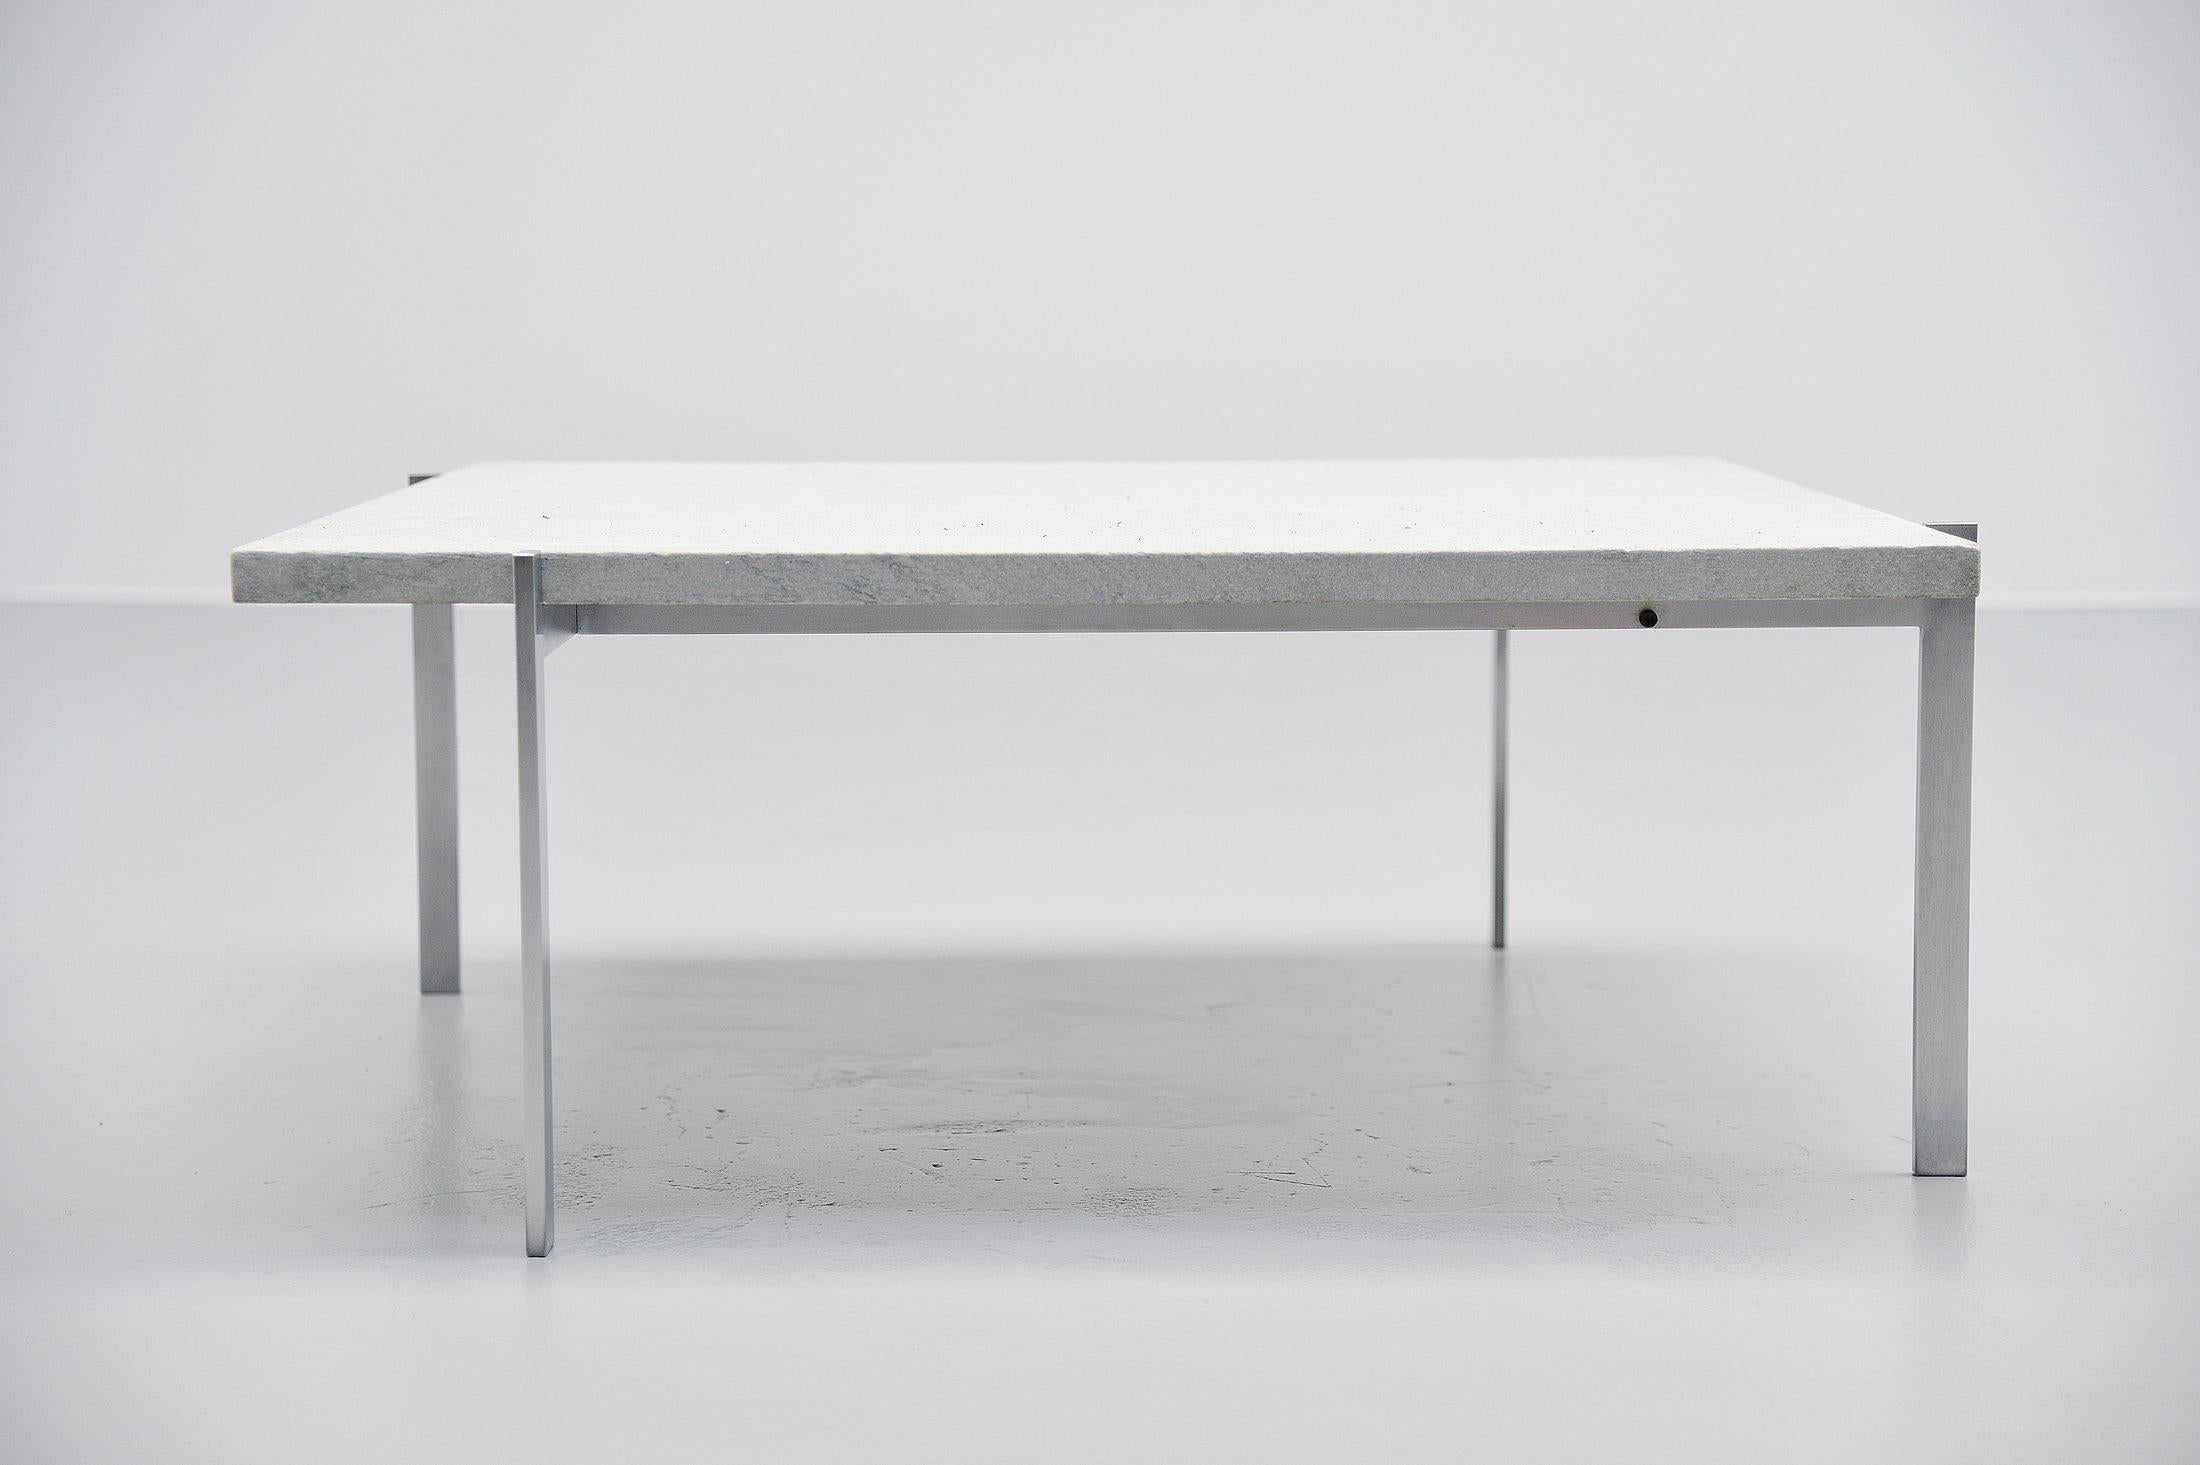 Fantastic Minimalist and world known coffee table model PK61 designed by Poul Kjærholm and manufactured by Ejvind Kold Christensen, Denmark, 1956. The table has a fantastic original and rare flint-rolled cipollini marble top. This is one of the few